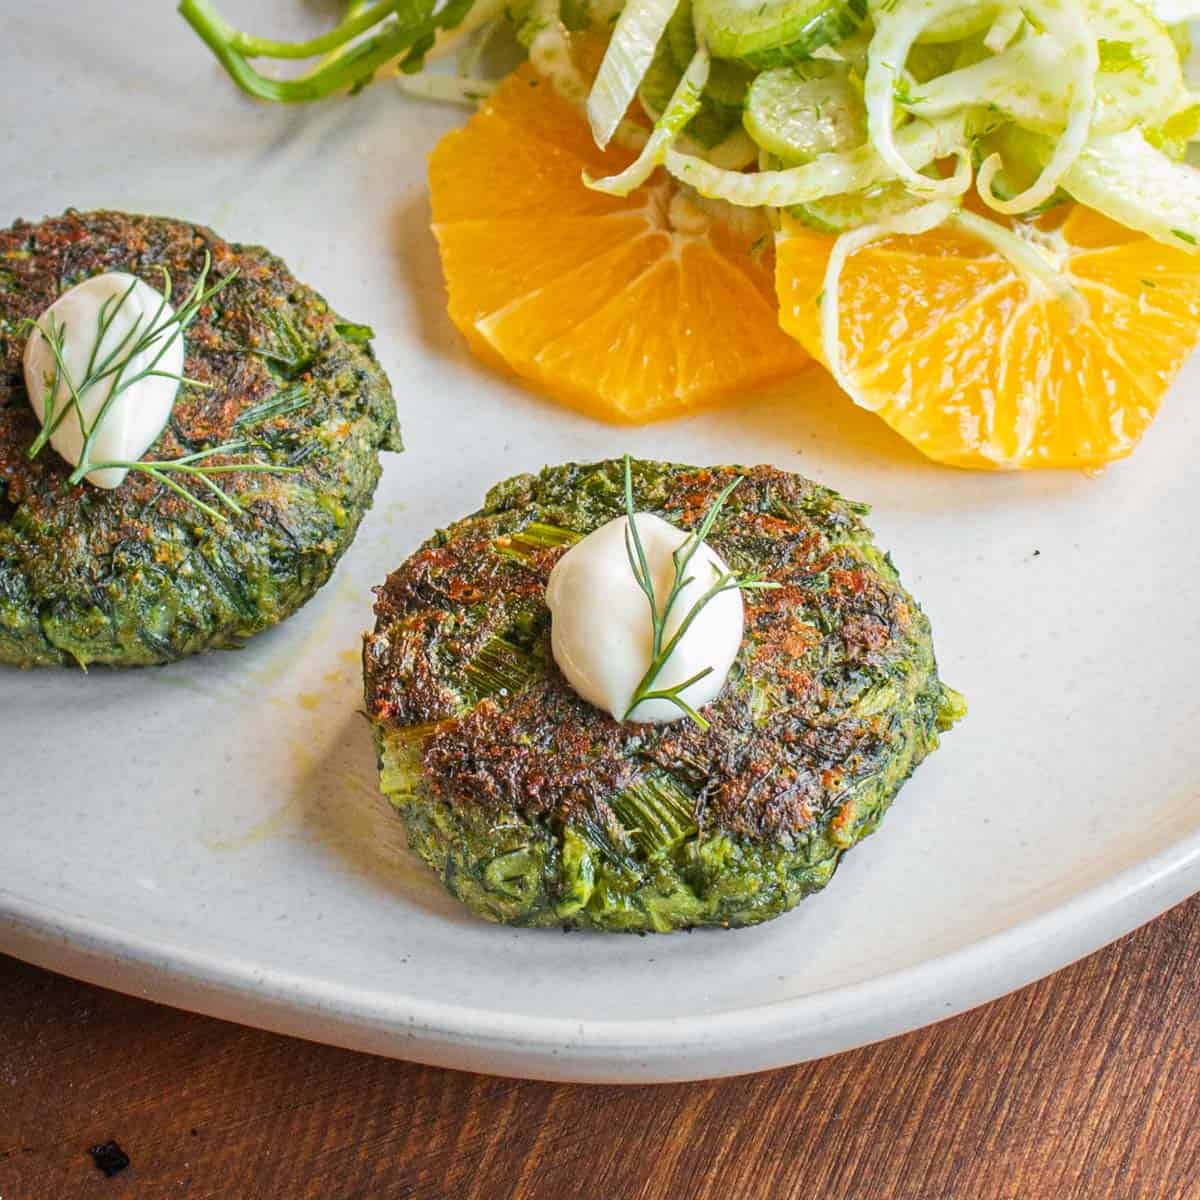 Wild fennel frond cakes on a plate with shaved fennel and orange slices.